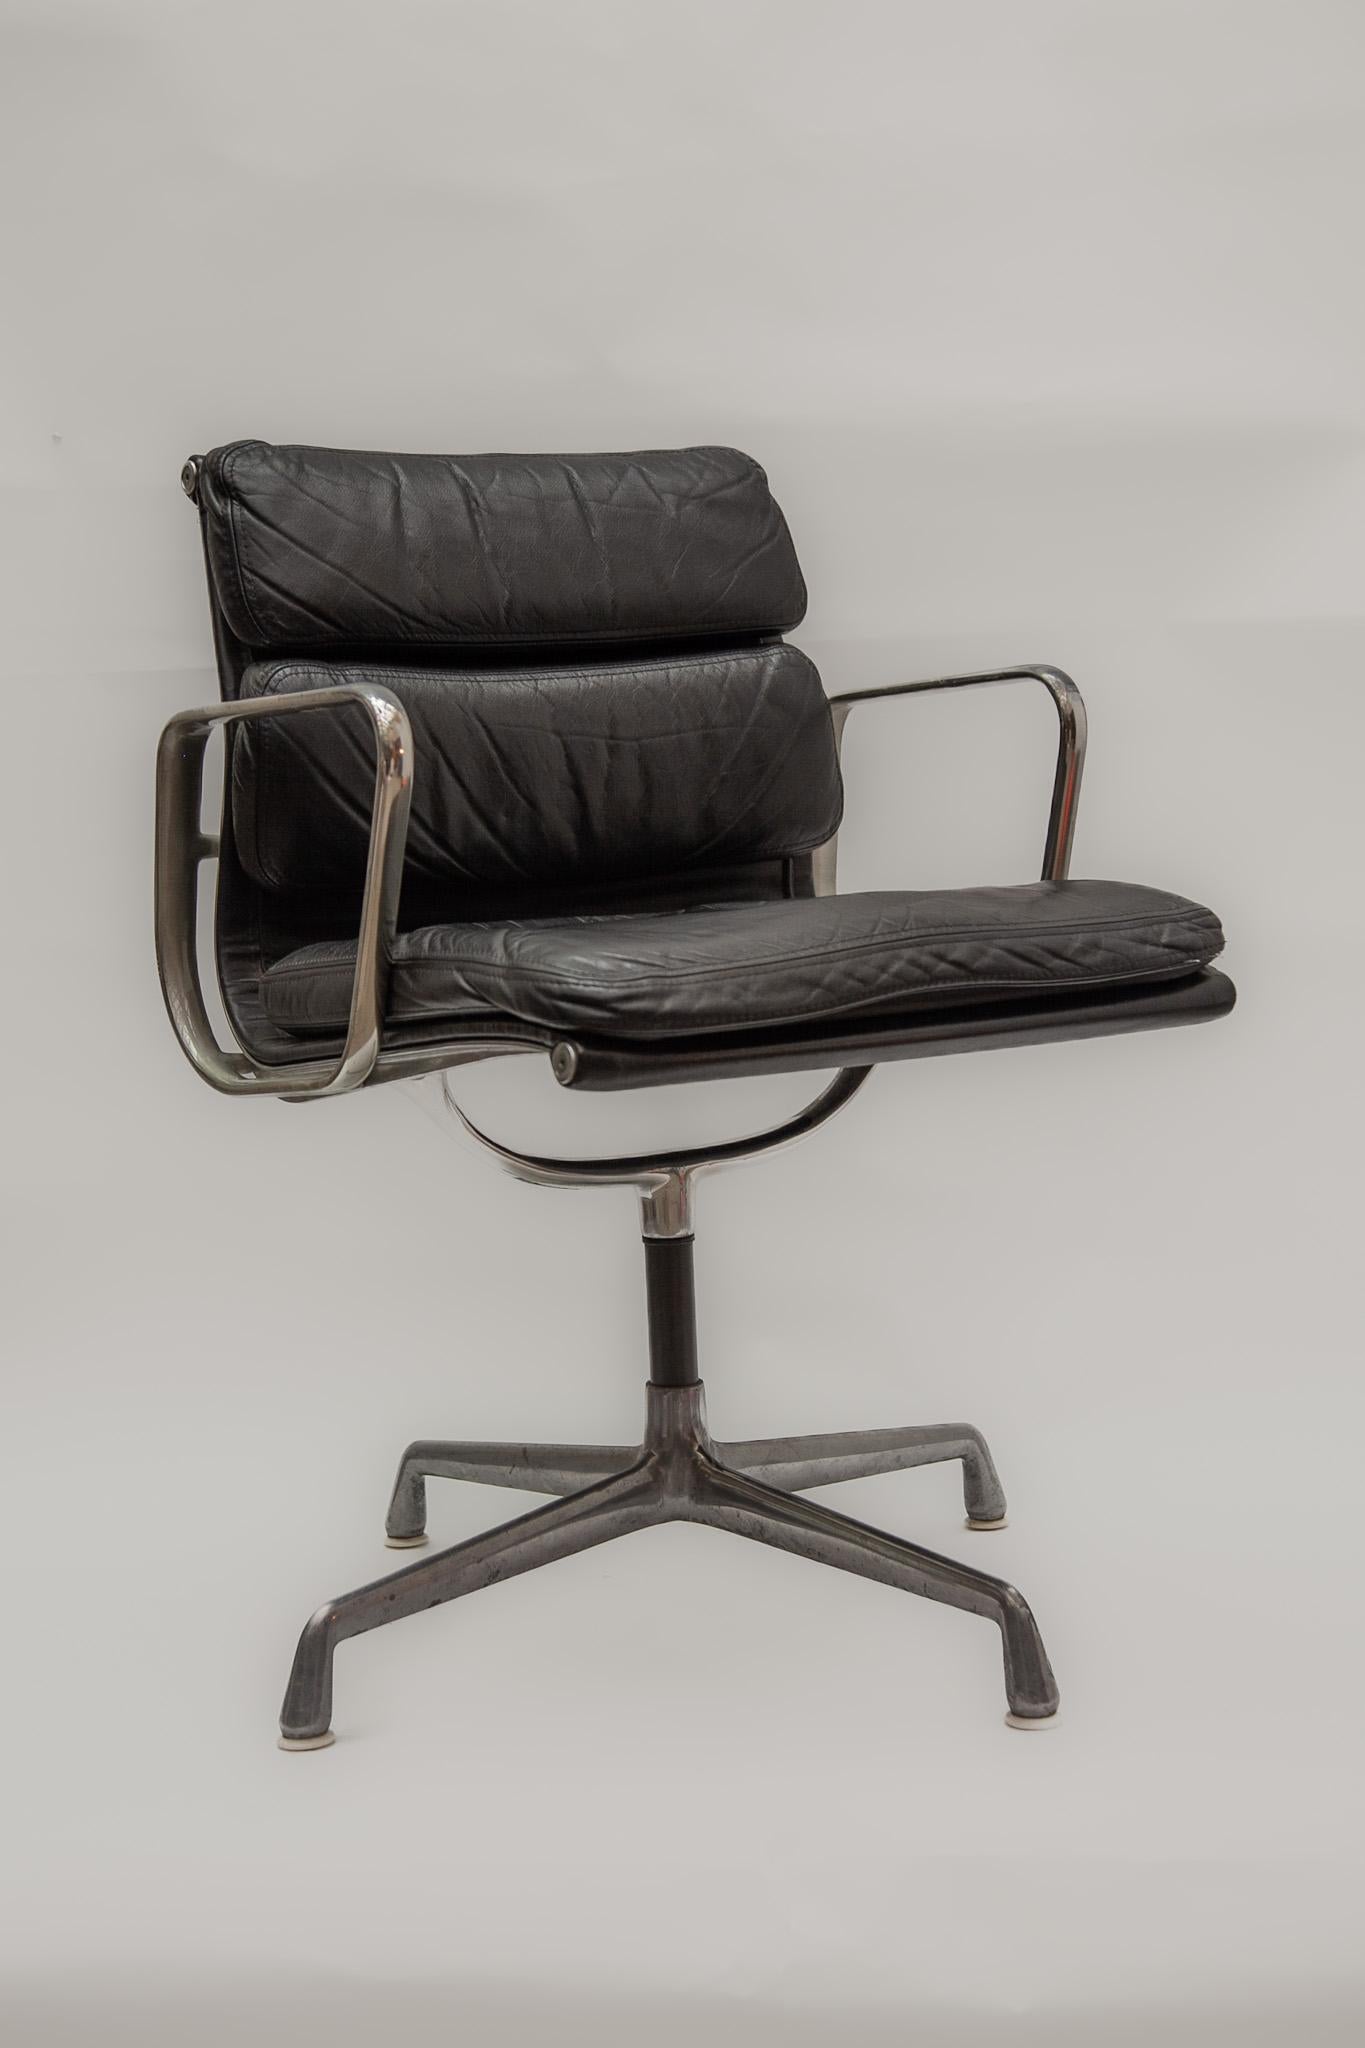 Mid-20th Century Vintage Black Leather Soft Pad Aluminium Group Desk Chair by Herman Miller 1960s